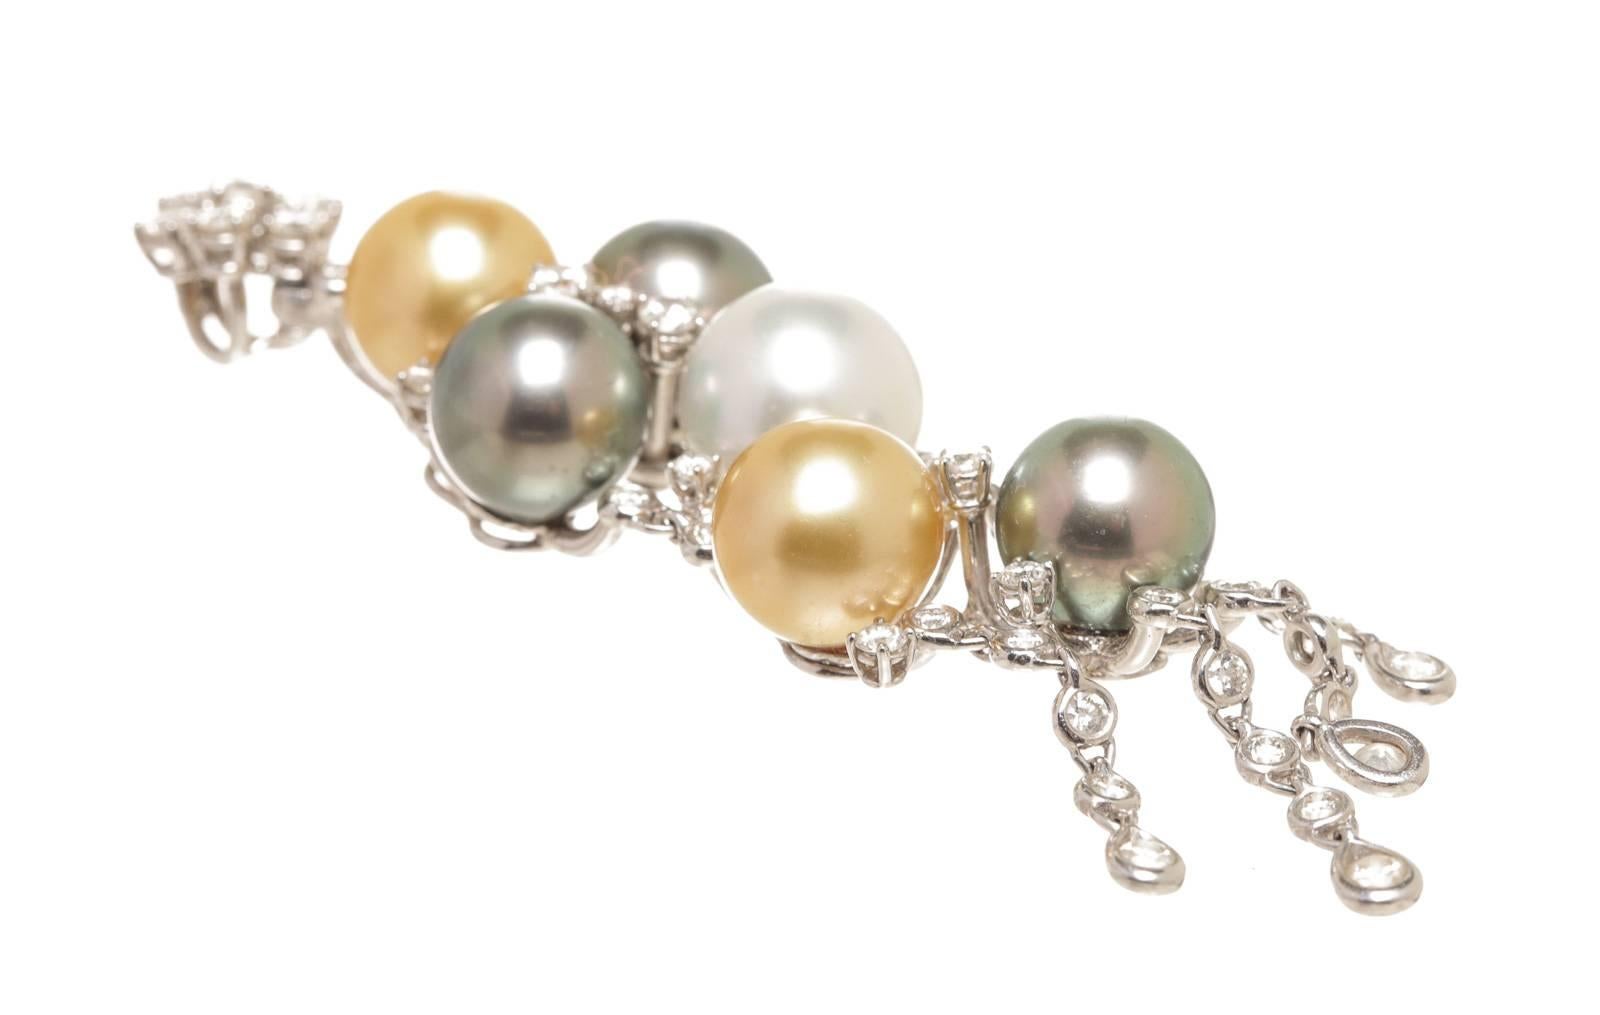 Featured here is this beautiful pendant crafted from 18k white gold and pearl.